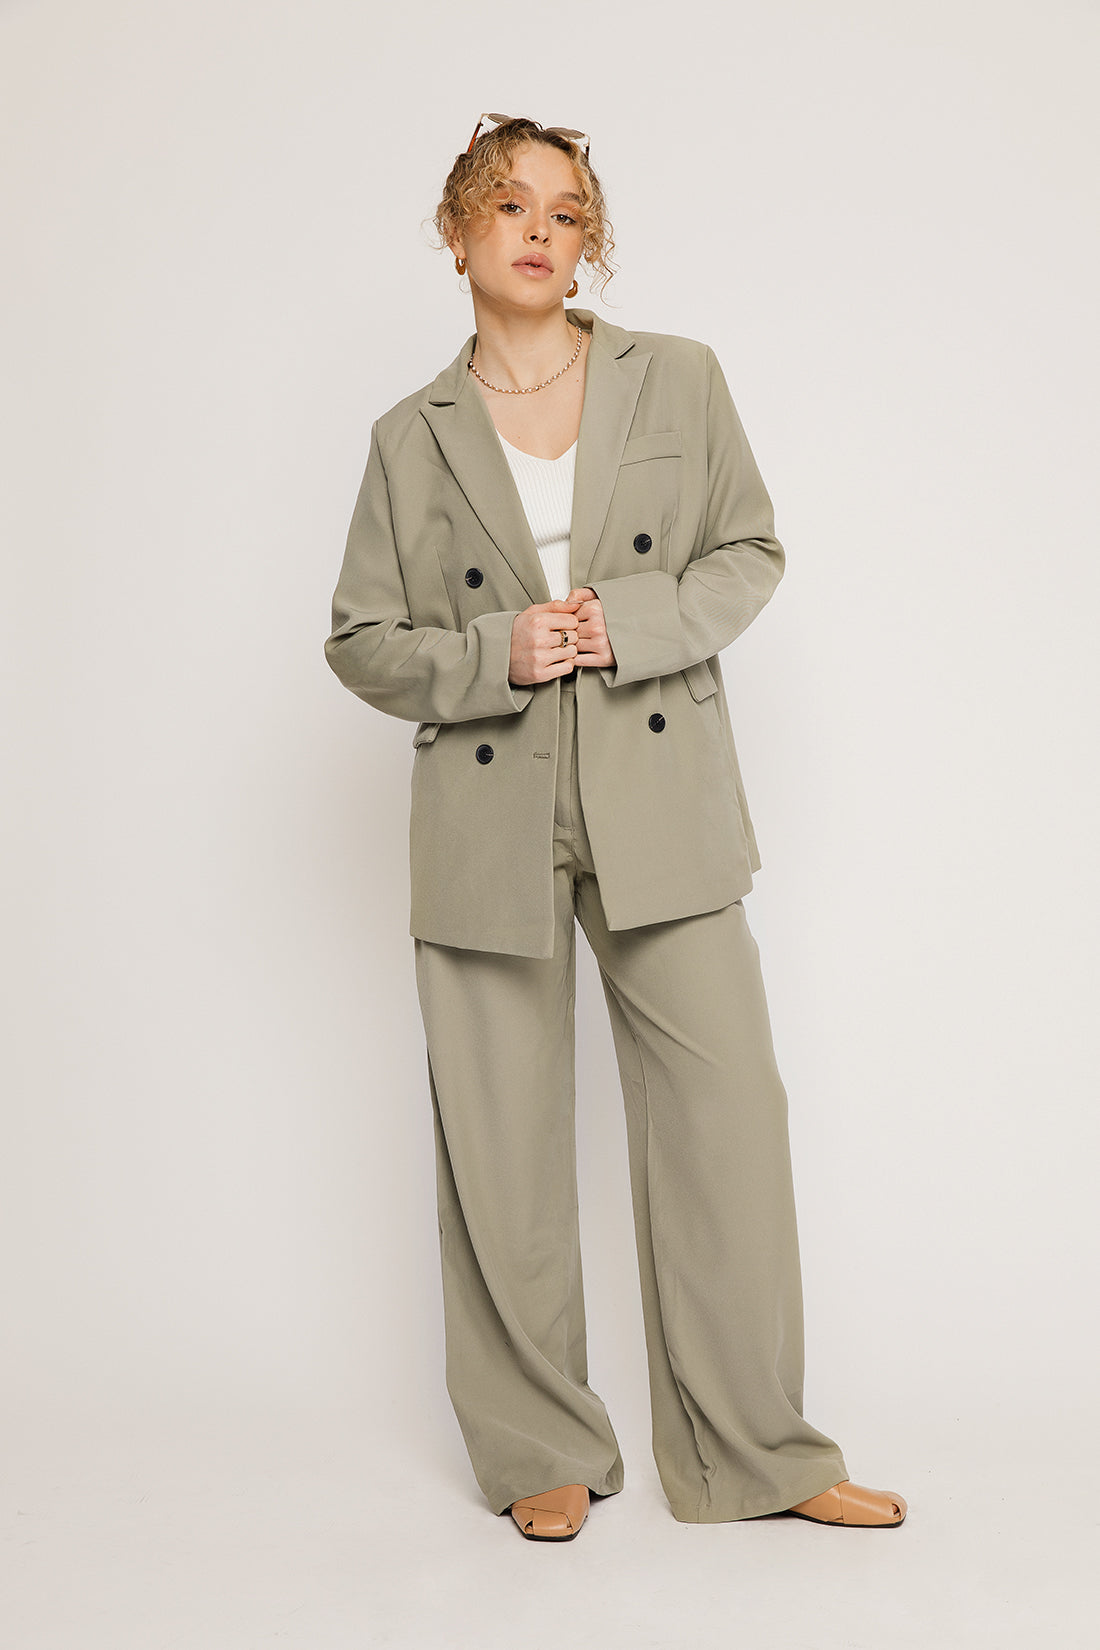 Everleigh Green Suit Trousers - Sugar + Style